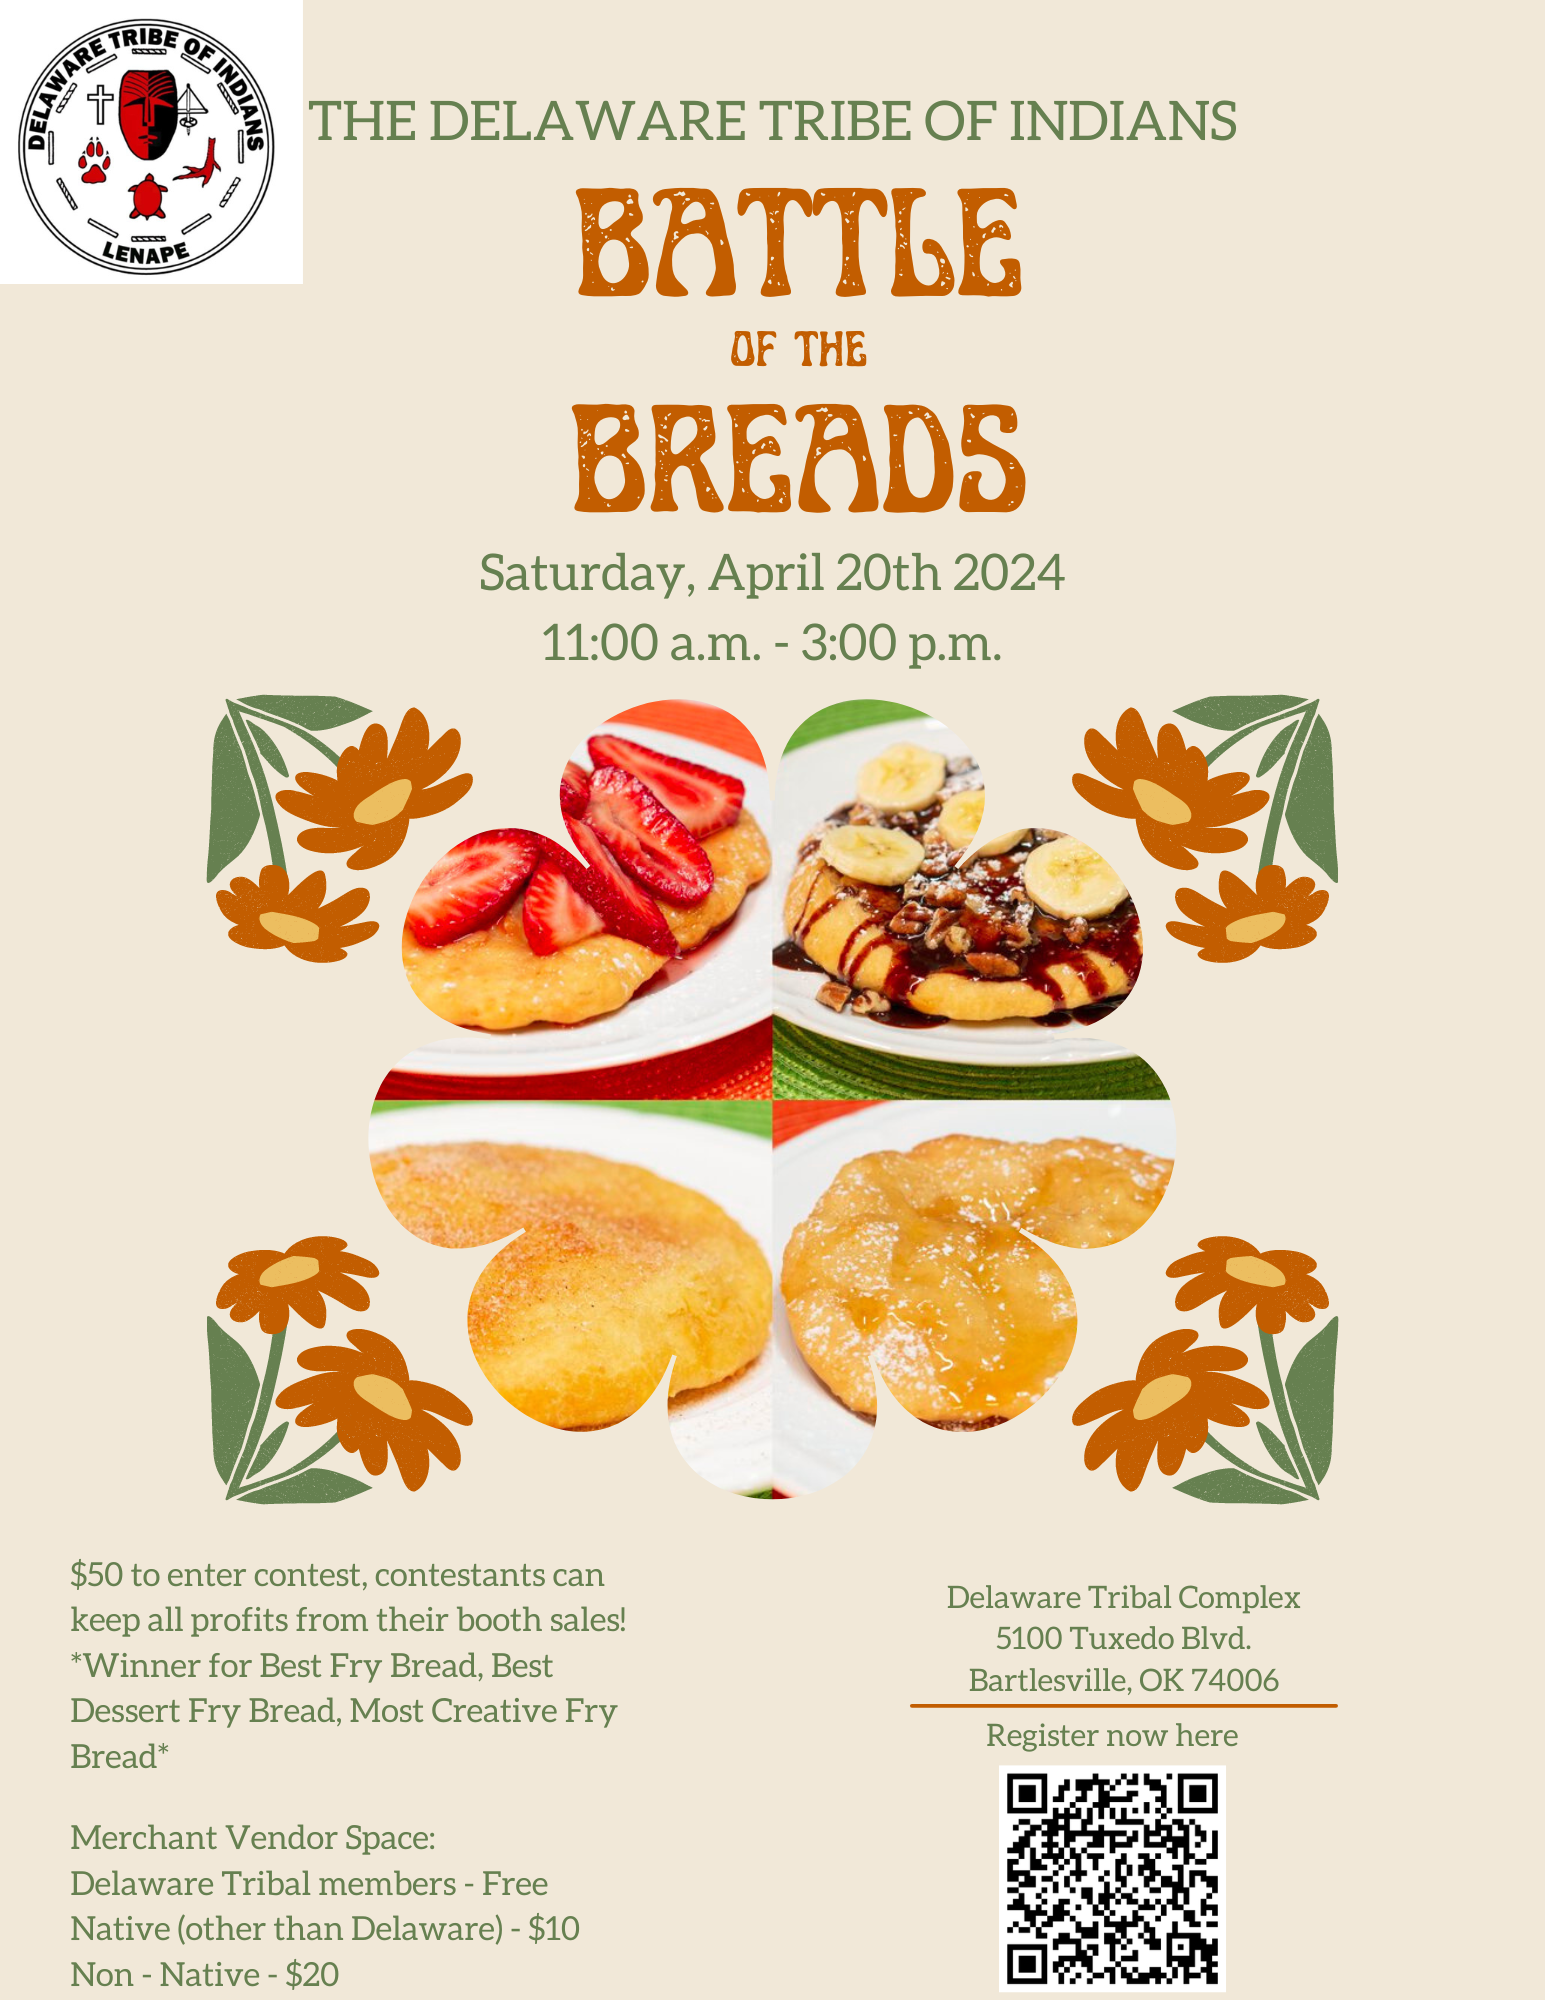 The Delaware Tribe of Indians presents the Battle of the Breads on Saturday, April 20, 2024 from 11:00 A.M. - 3:00 P.M. at the Delaware Tribal Complex in Bartlesville, Oklahoma.

$50 to enter contest, contestants can keep all profits from their booth sales!

*Winner for Best Fry Bread, Best Dessert Fry Bread, Most Creative Fry Bread*

Merchant Vendor Space: 

Delaware Tribal members - Free
Native (other than Delaware) - $10
Non-Native - $20